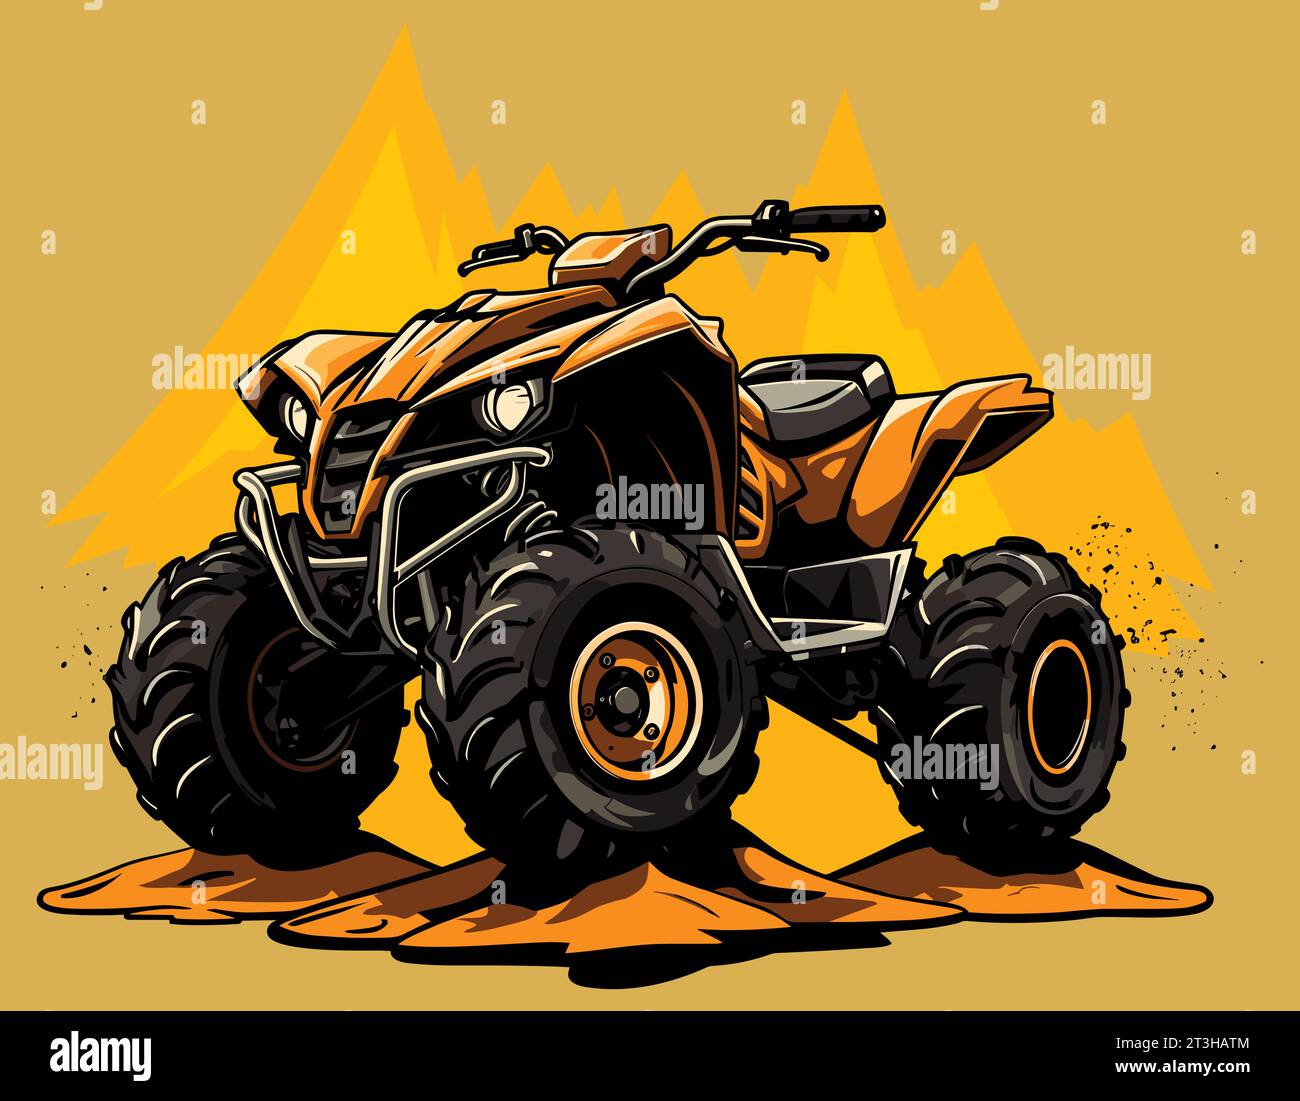 Vibrant illustration of orange all-terrain vehicle on sand, posed against yellow background with abstract sand dunes, ready for rugged adventures. Stock Vector